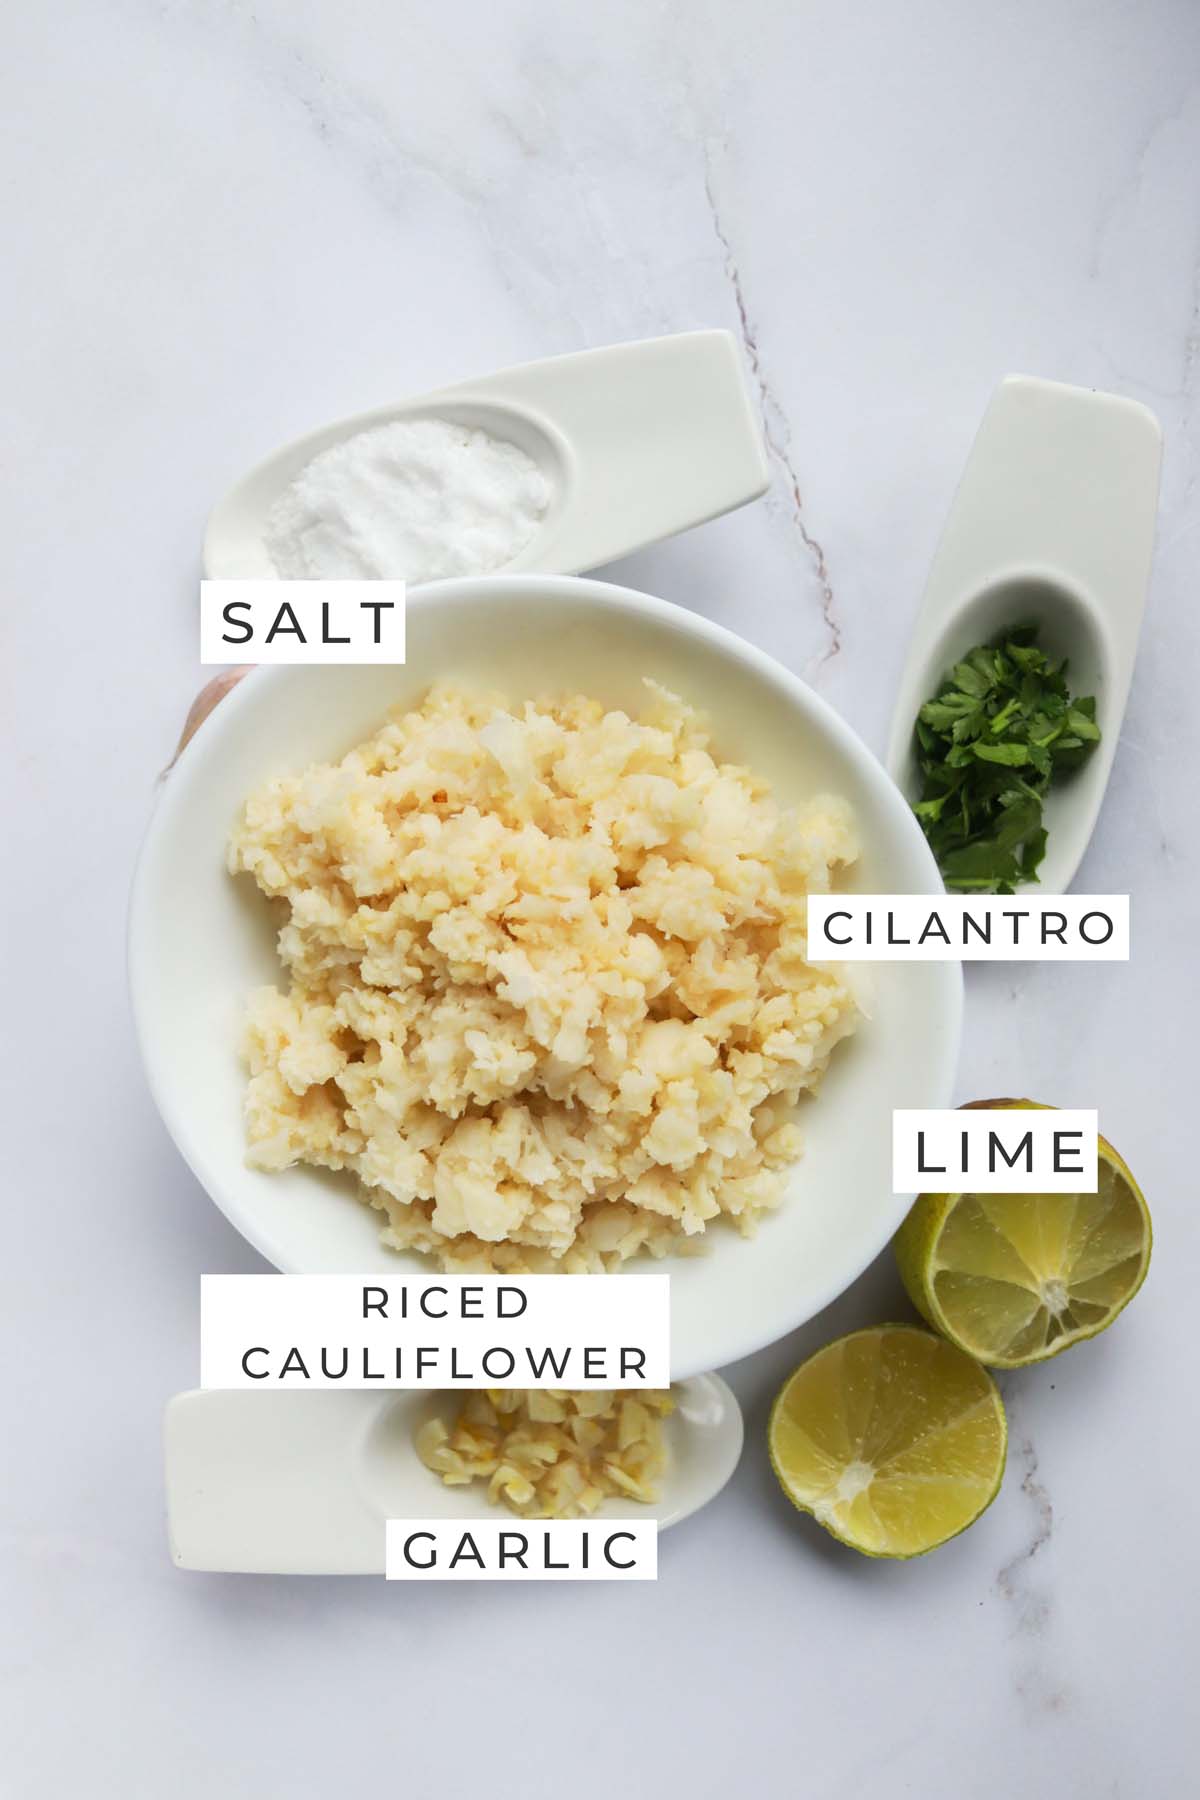 Labeled ingredients for the cauliflower rice.